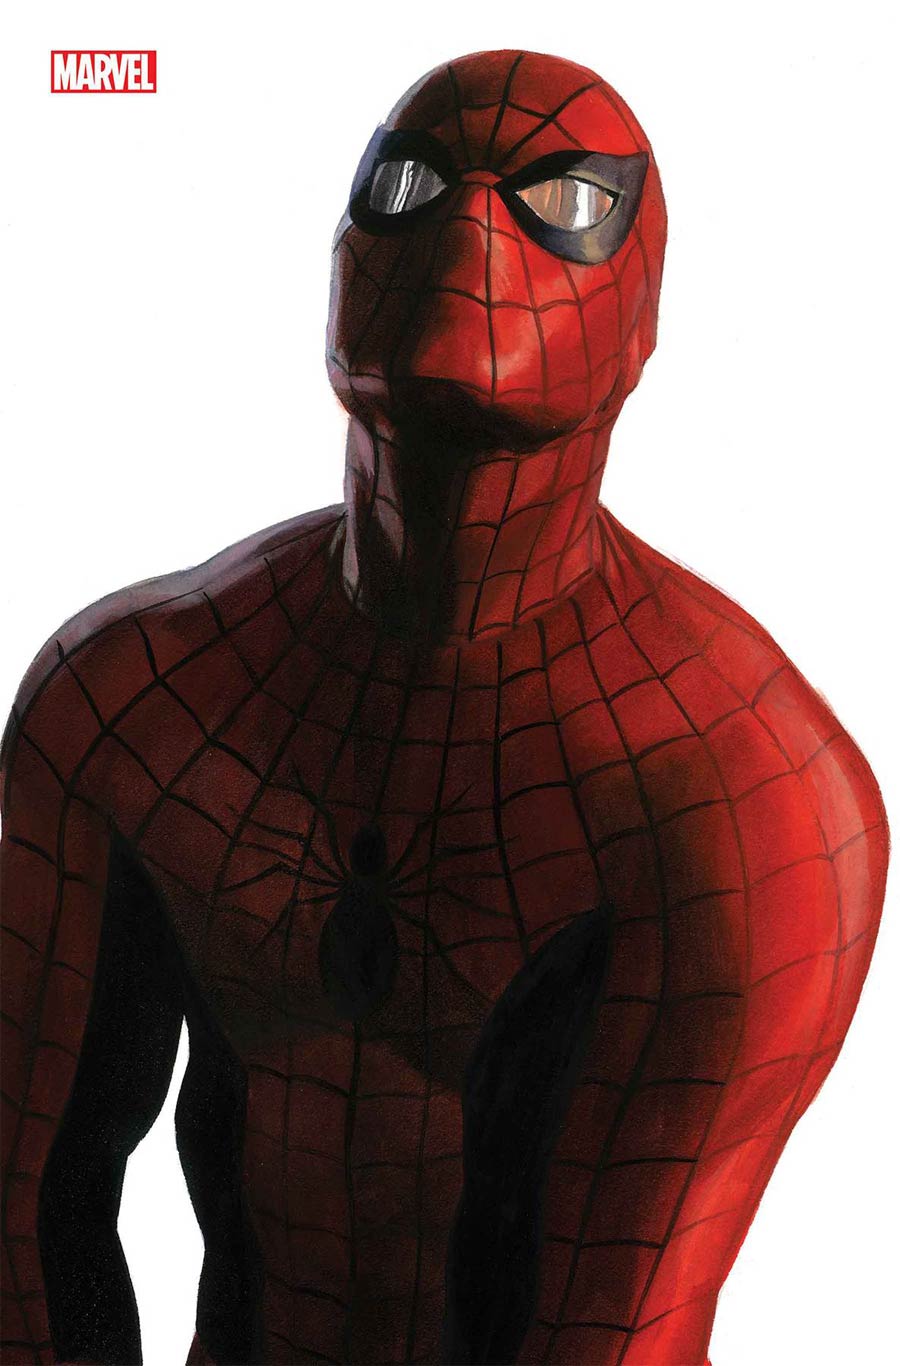 Amazing Spider-Man Vol 5 #50 Cover B Variant Alex Ross Timeless Spider-Man Cover